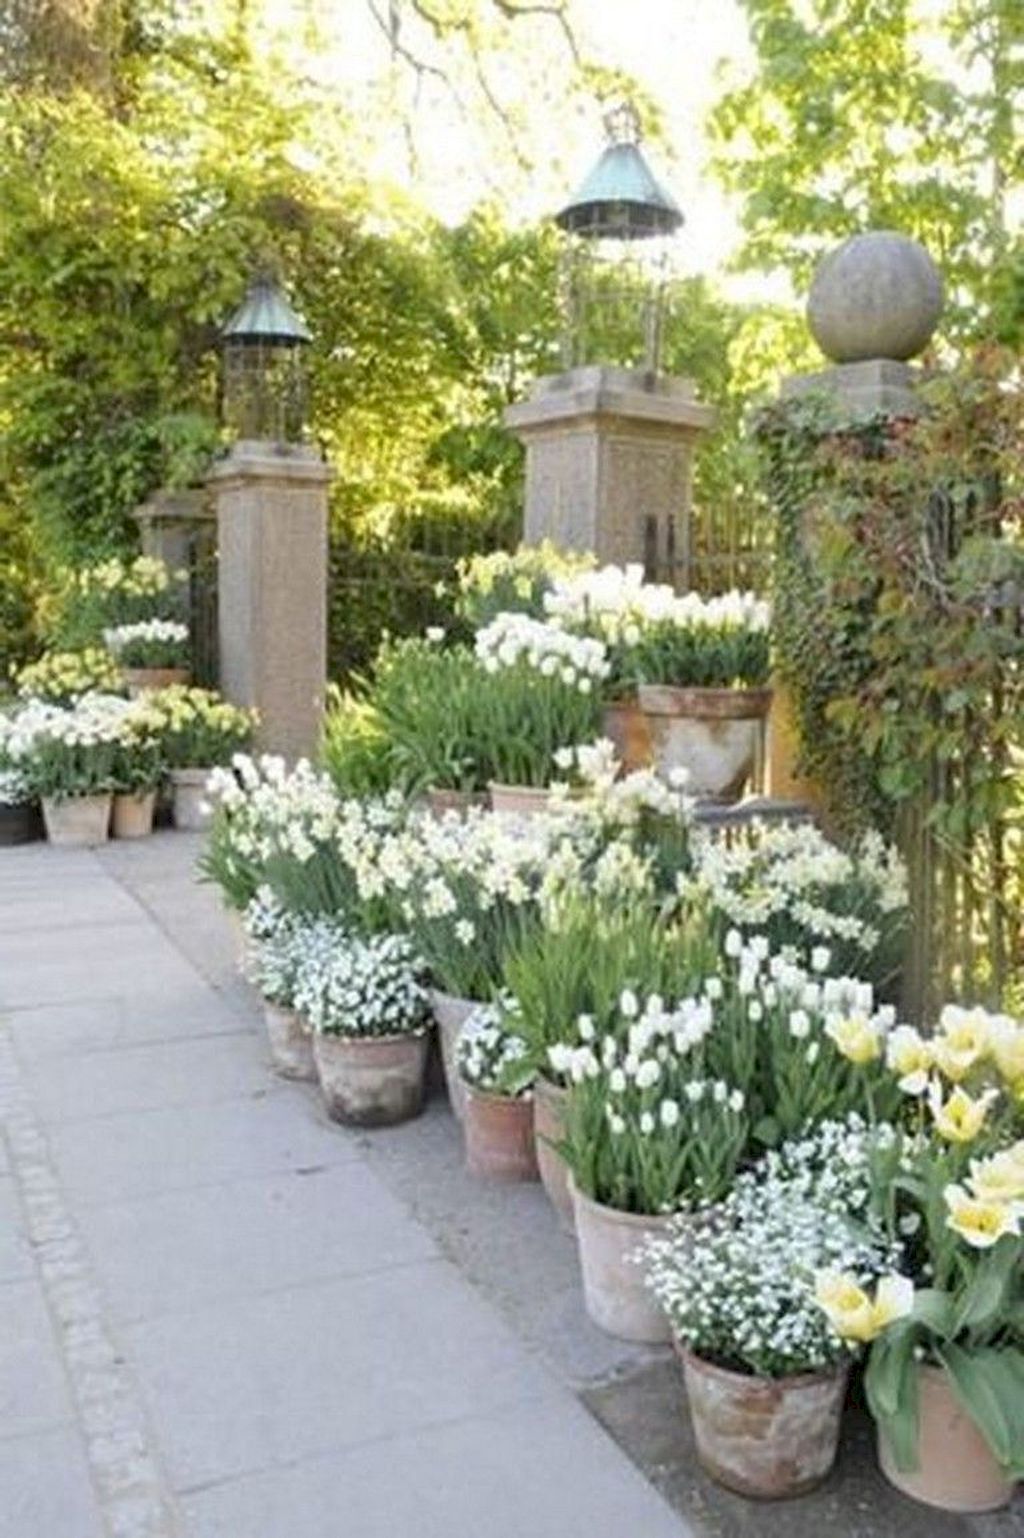 80 Fresh and Beautiful Front Yard Flowers Garden Landscaping Ideas - DoMakeover.com - 80 Fresh and Beautiful Front Yard Flowers Garden Landscaping Ideas - DoMakeover.com -   18 beauty Flowers garden ideas